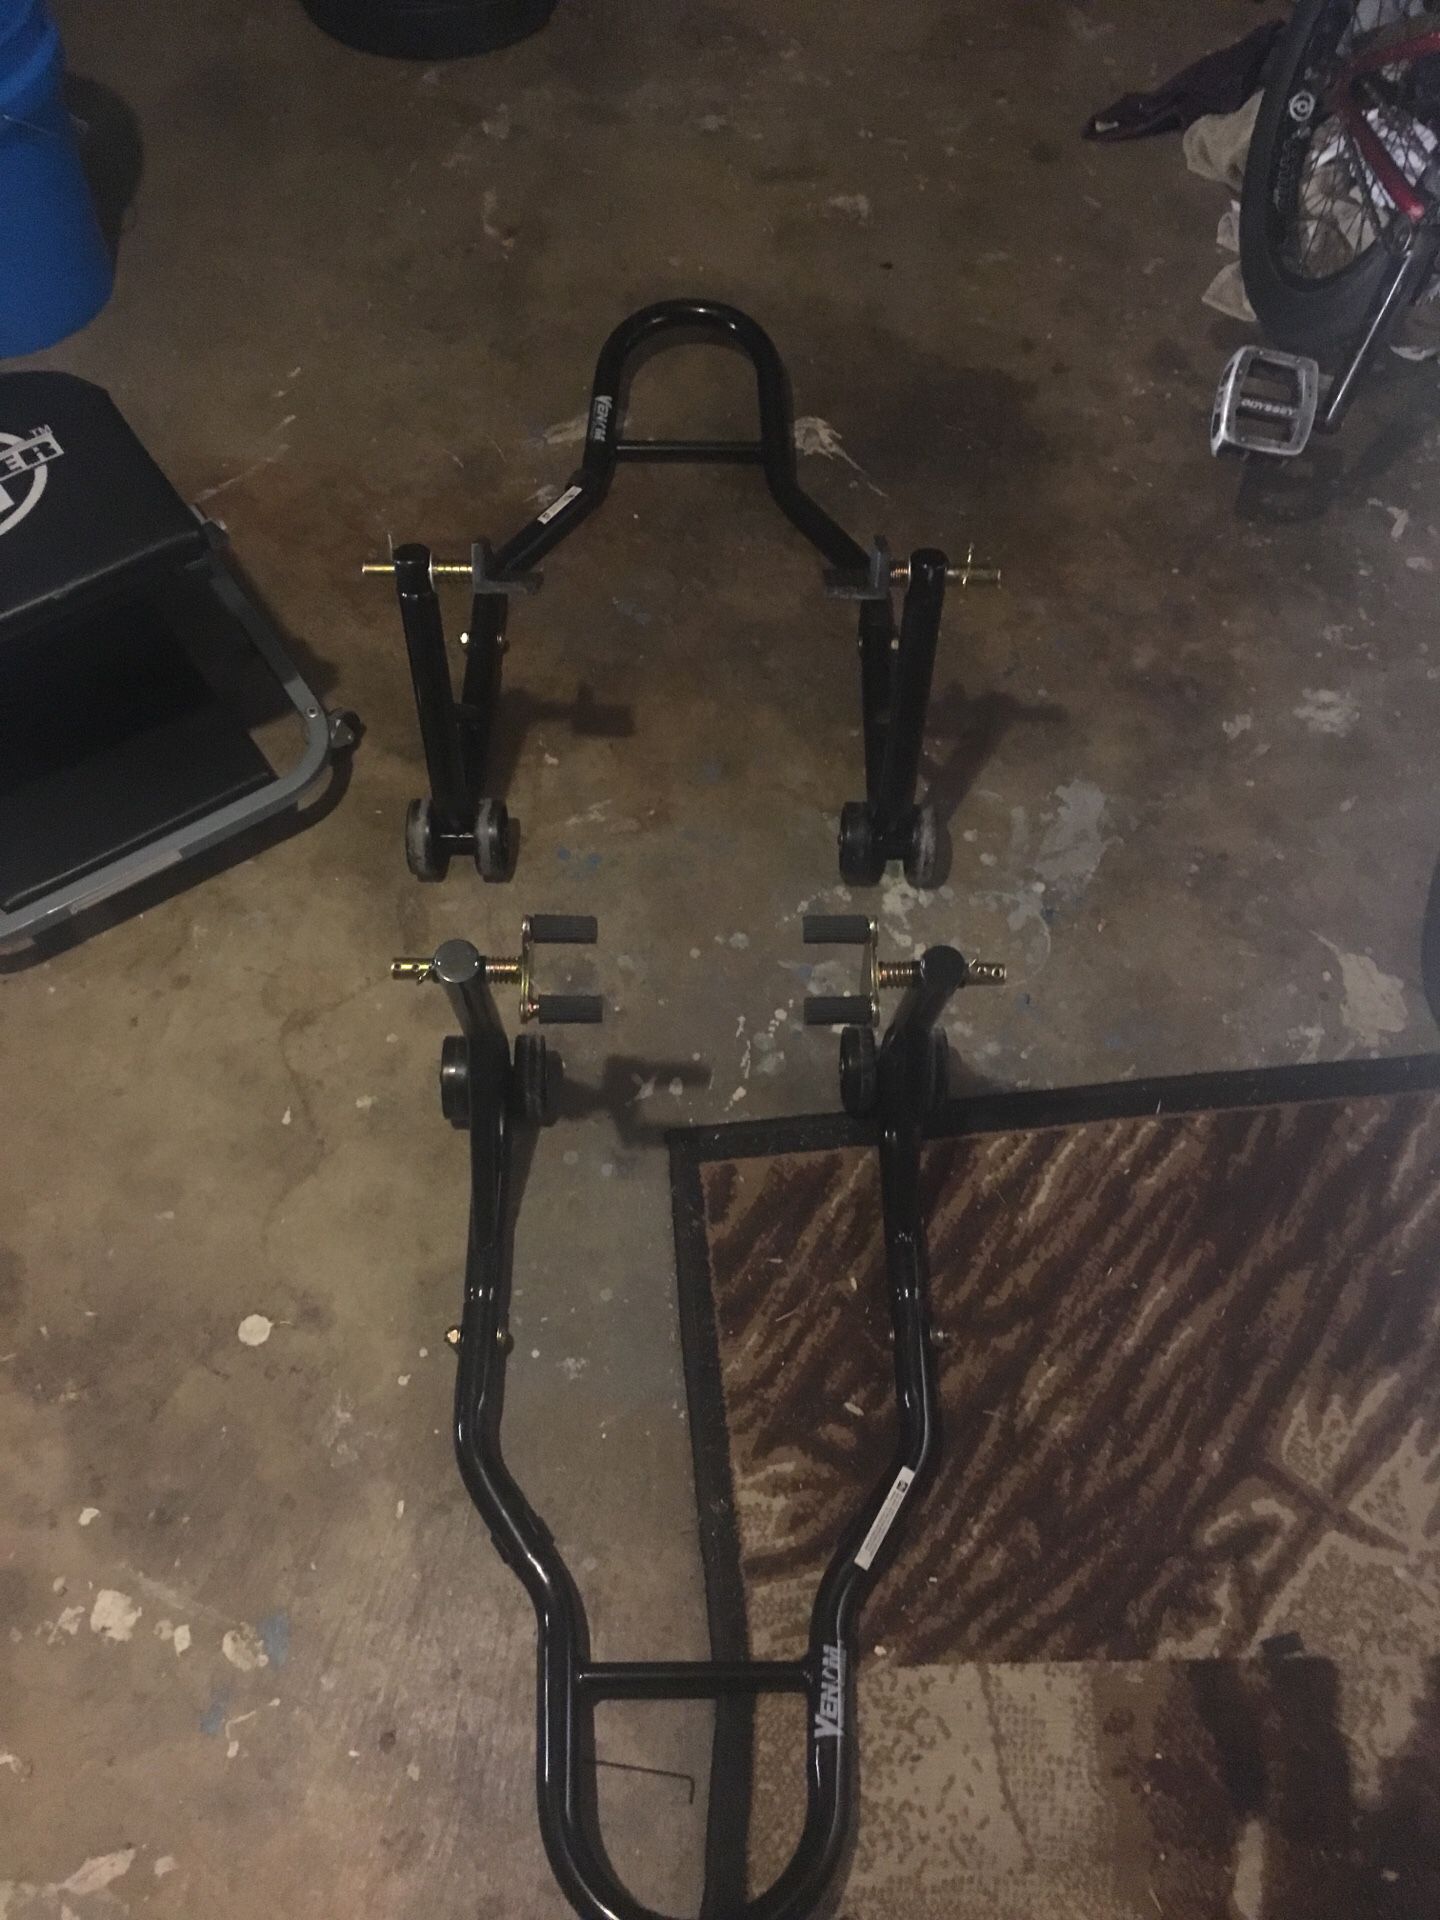 Streetbike stands